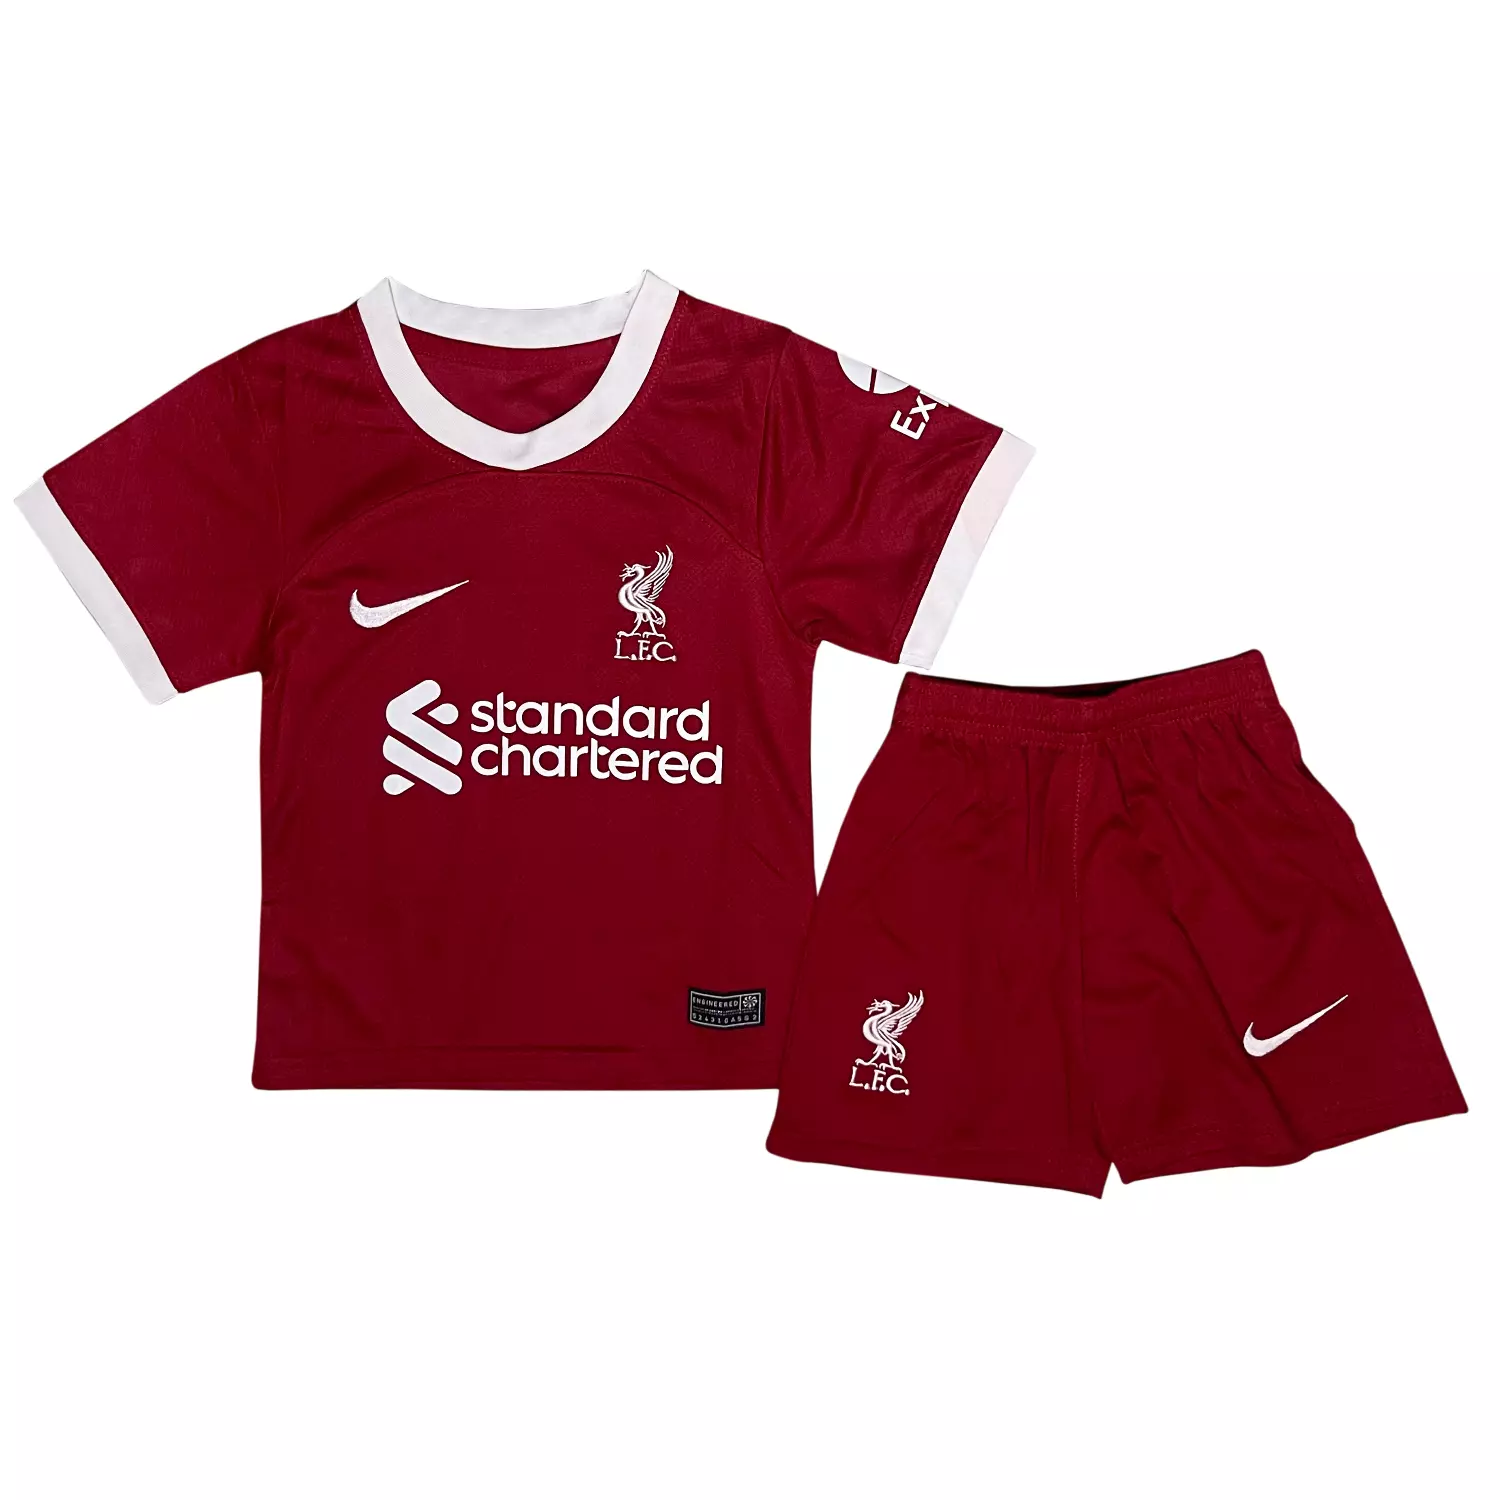 <p><strong>LIVERPOOL</strong></p><p><span style="color: rgb(161, 161, 161)">KIDS</span></p>